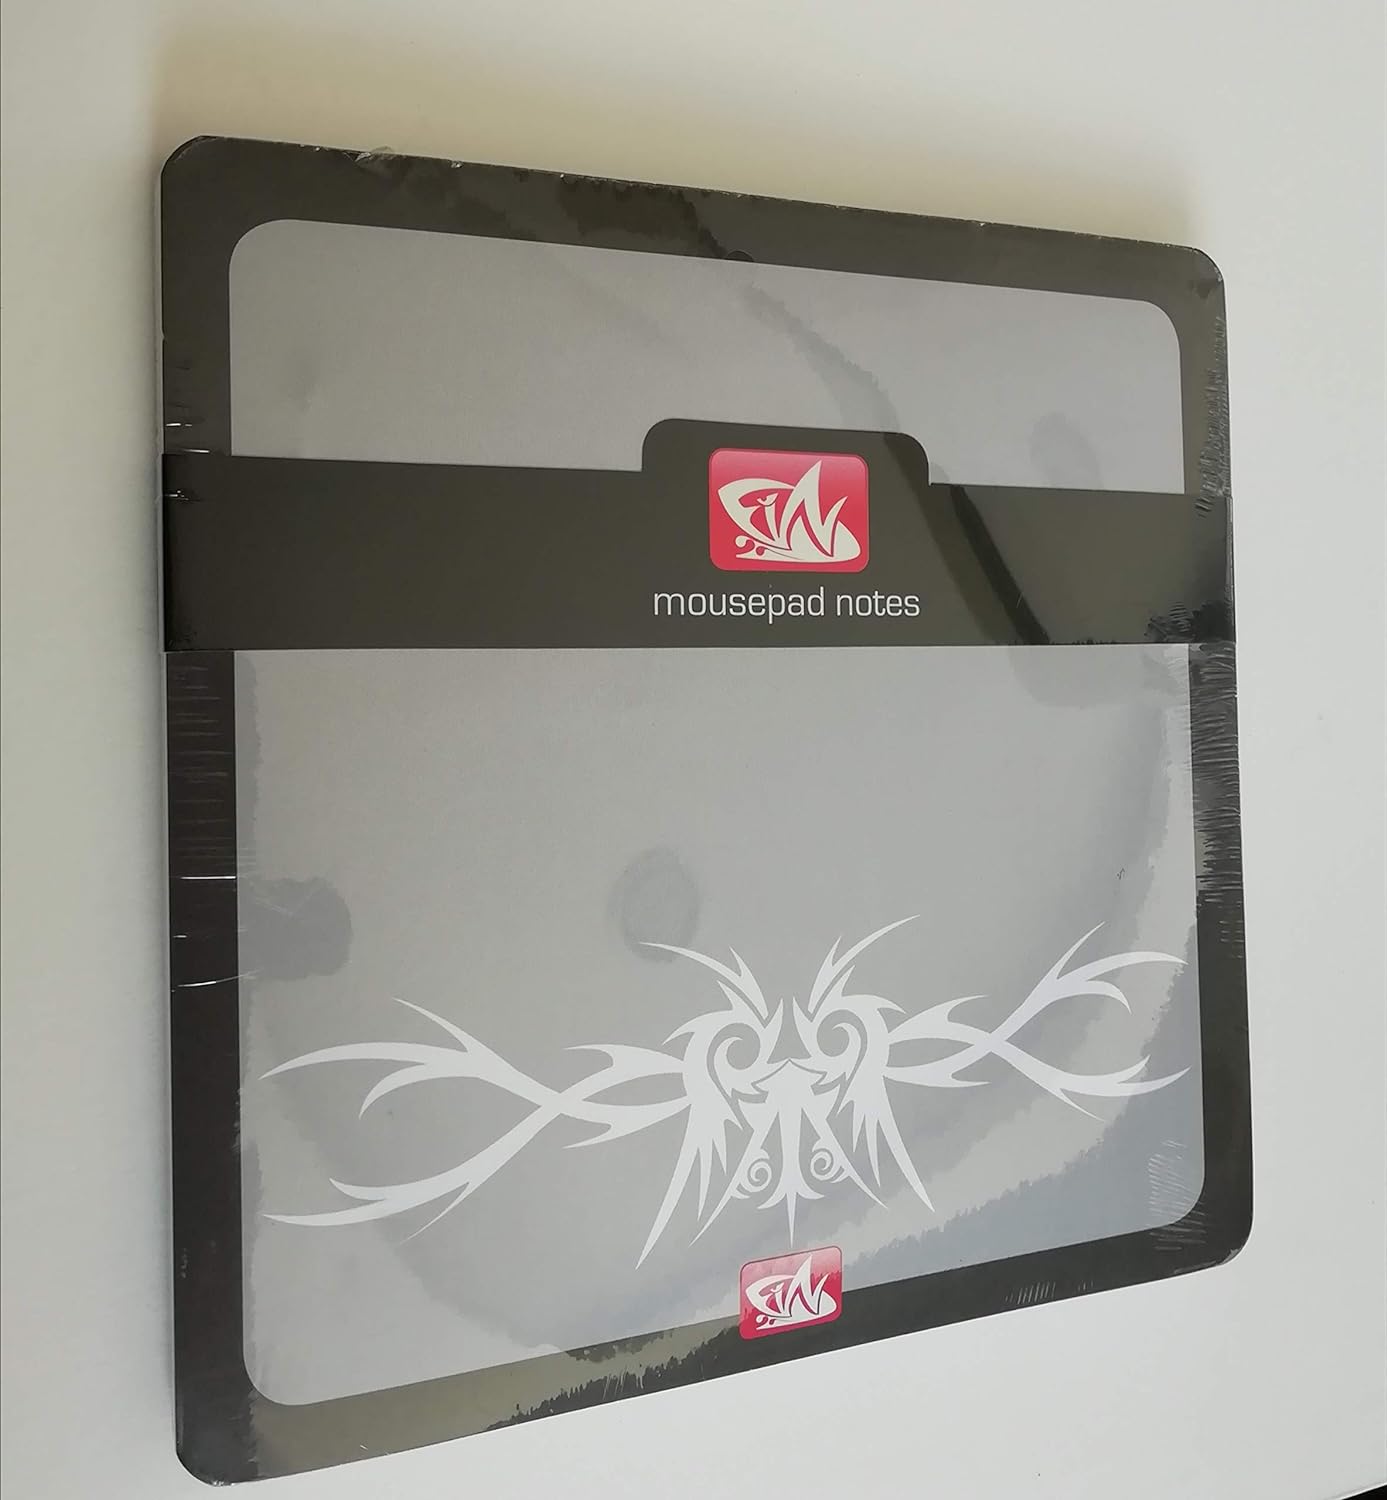 Fin Surf Mouse pad Notes RRP 3.99 CLEARANCE XL 1.99